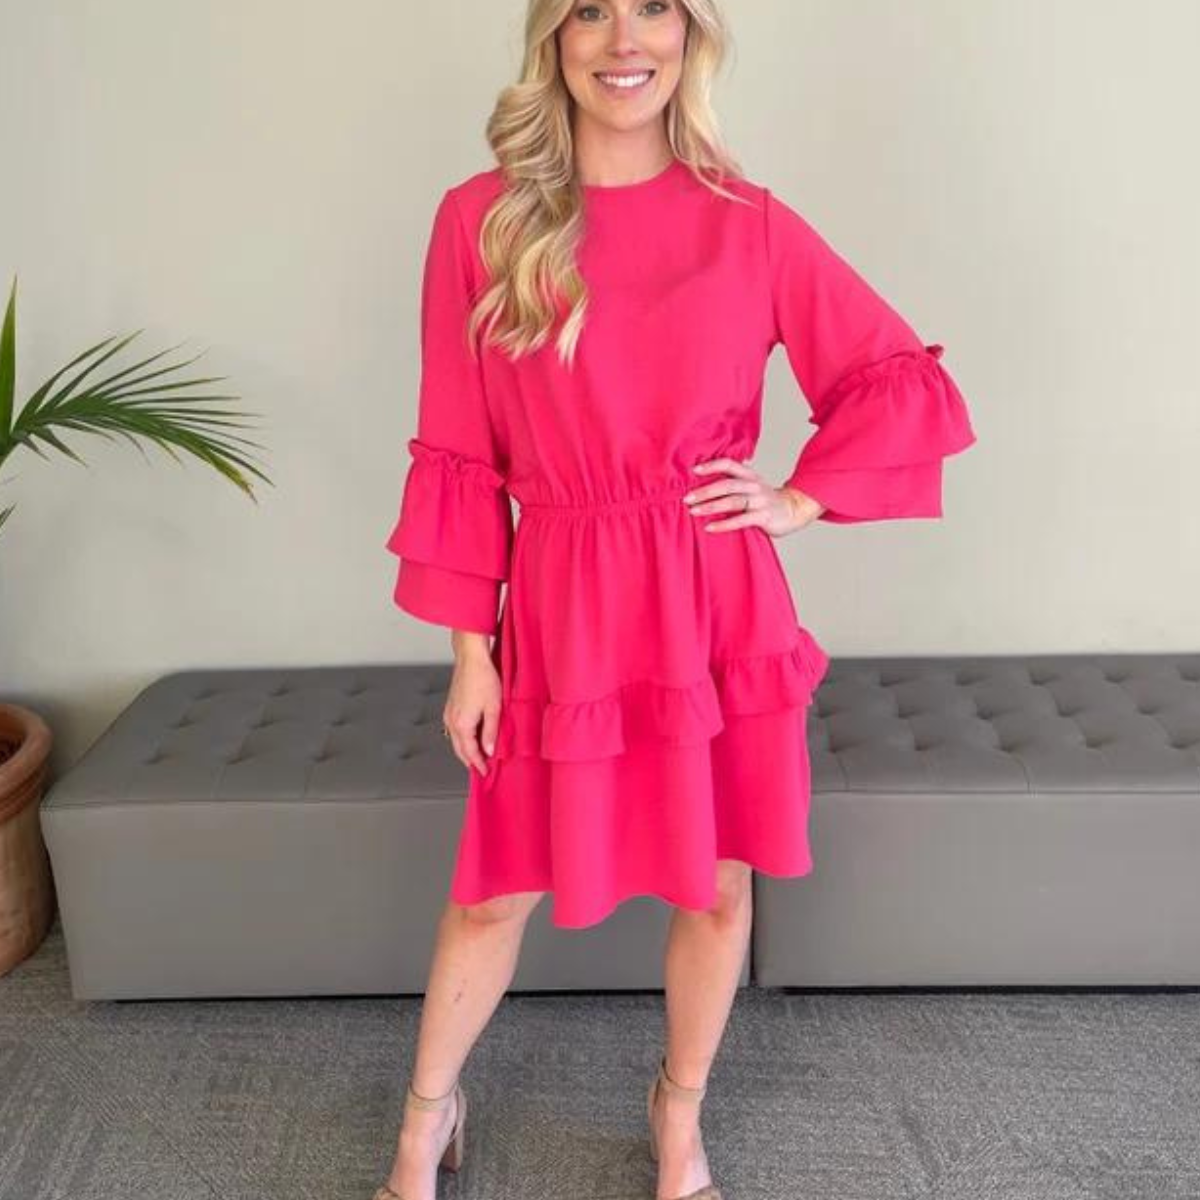 A blonde woman in a Pink Ruffle Accent Dress by Carole Christian, featuring a luxor polyester fabric, is posing for a photo.